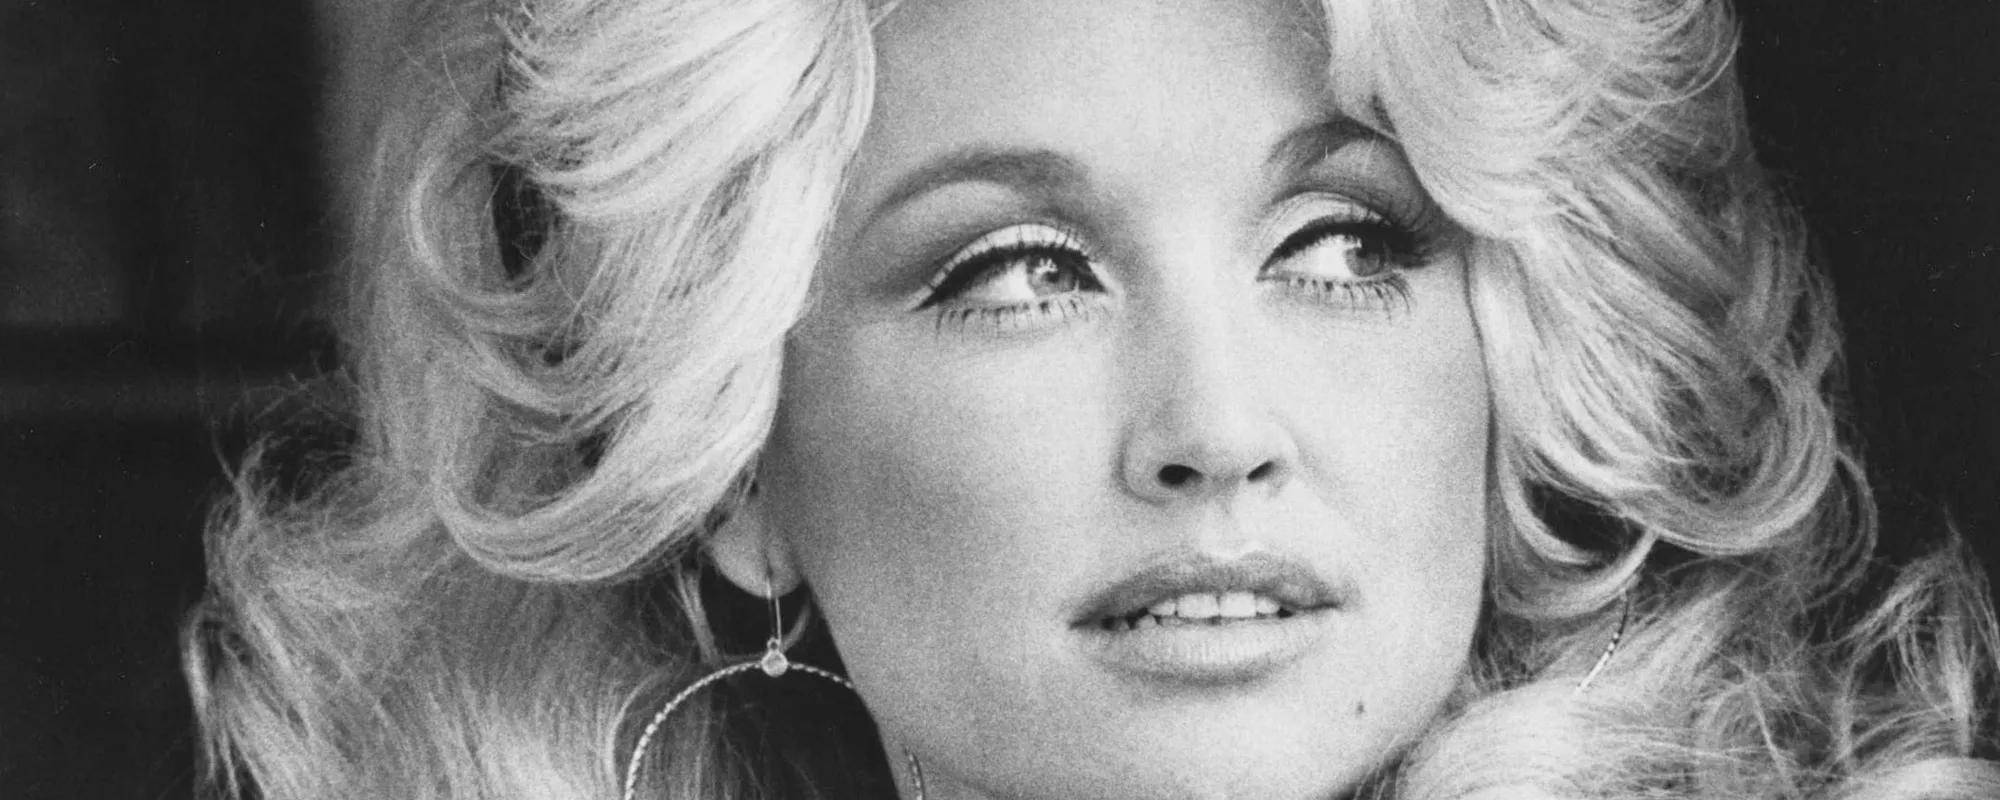 Then & Now: Dolly Parton’s Journey from Small Town Tennessee to Country Legend